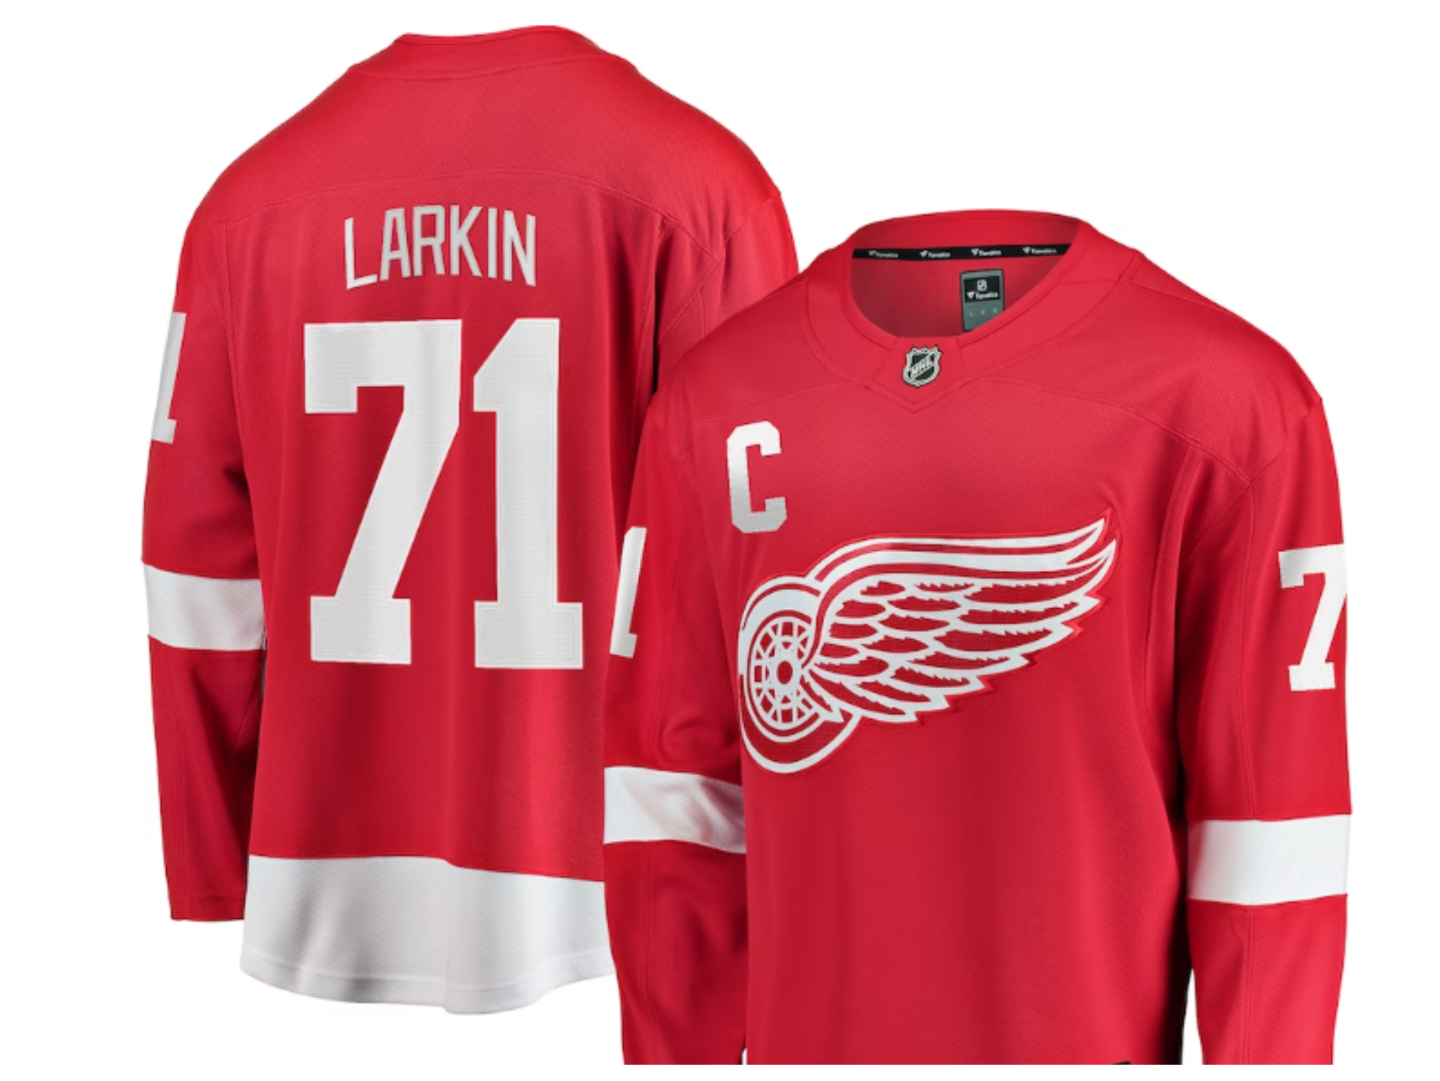 Red Wings sign captain Dylan Larkin to 8-year extension